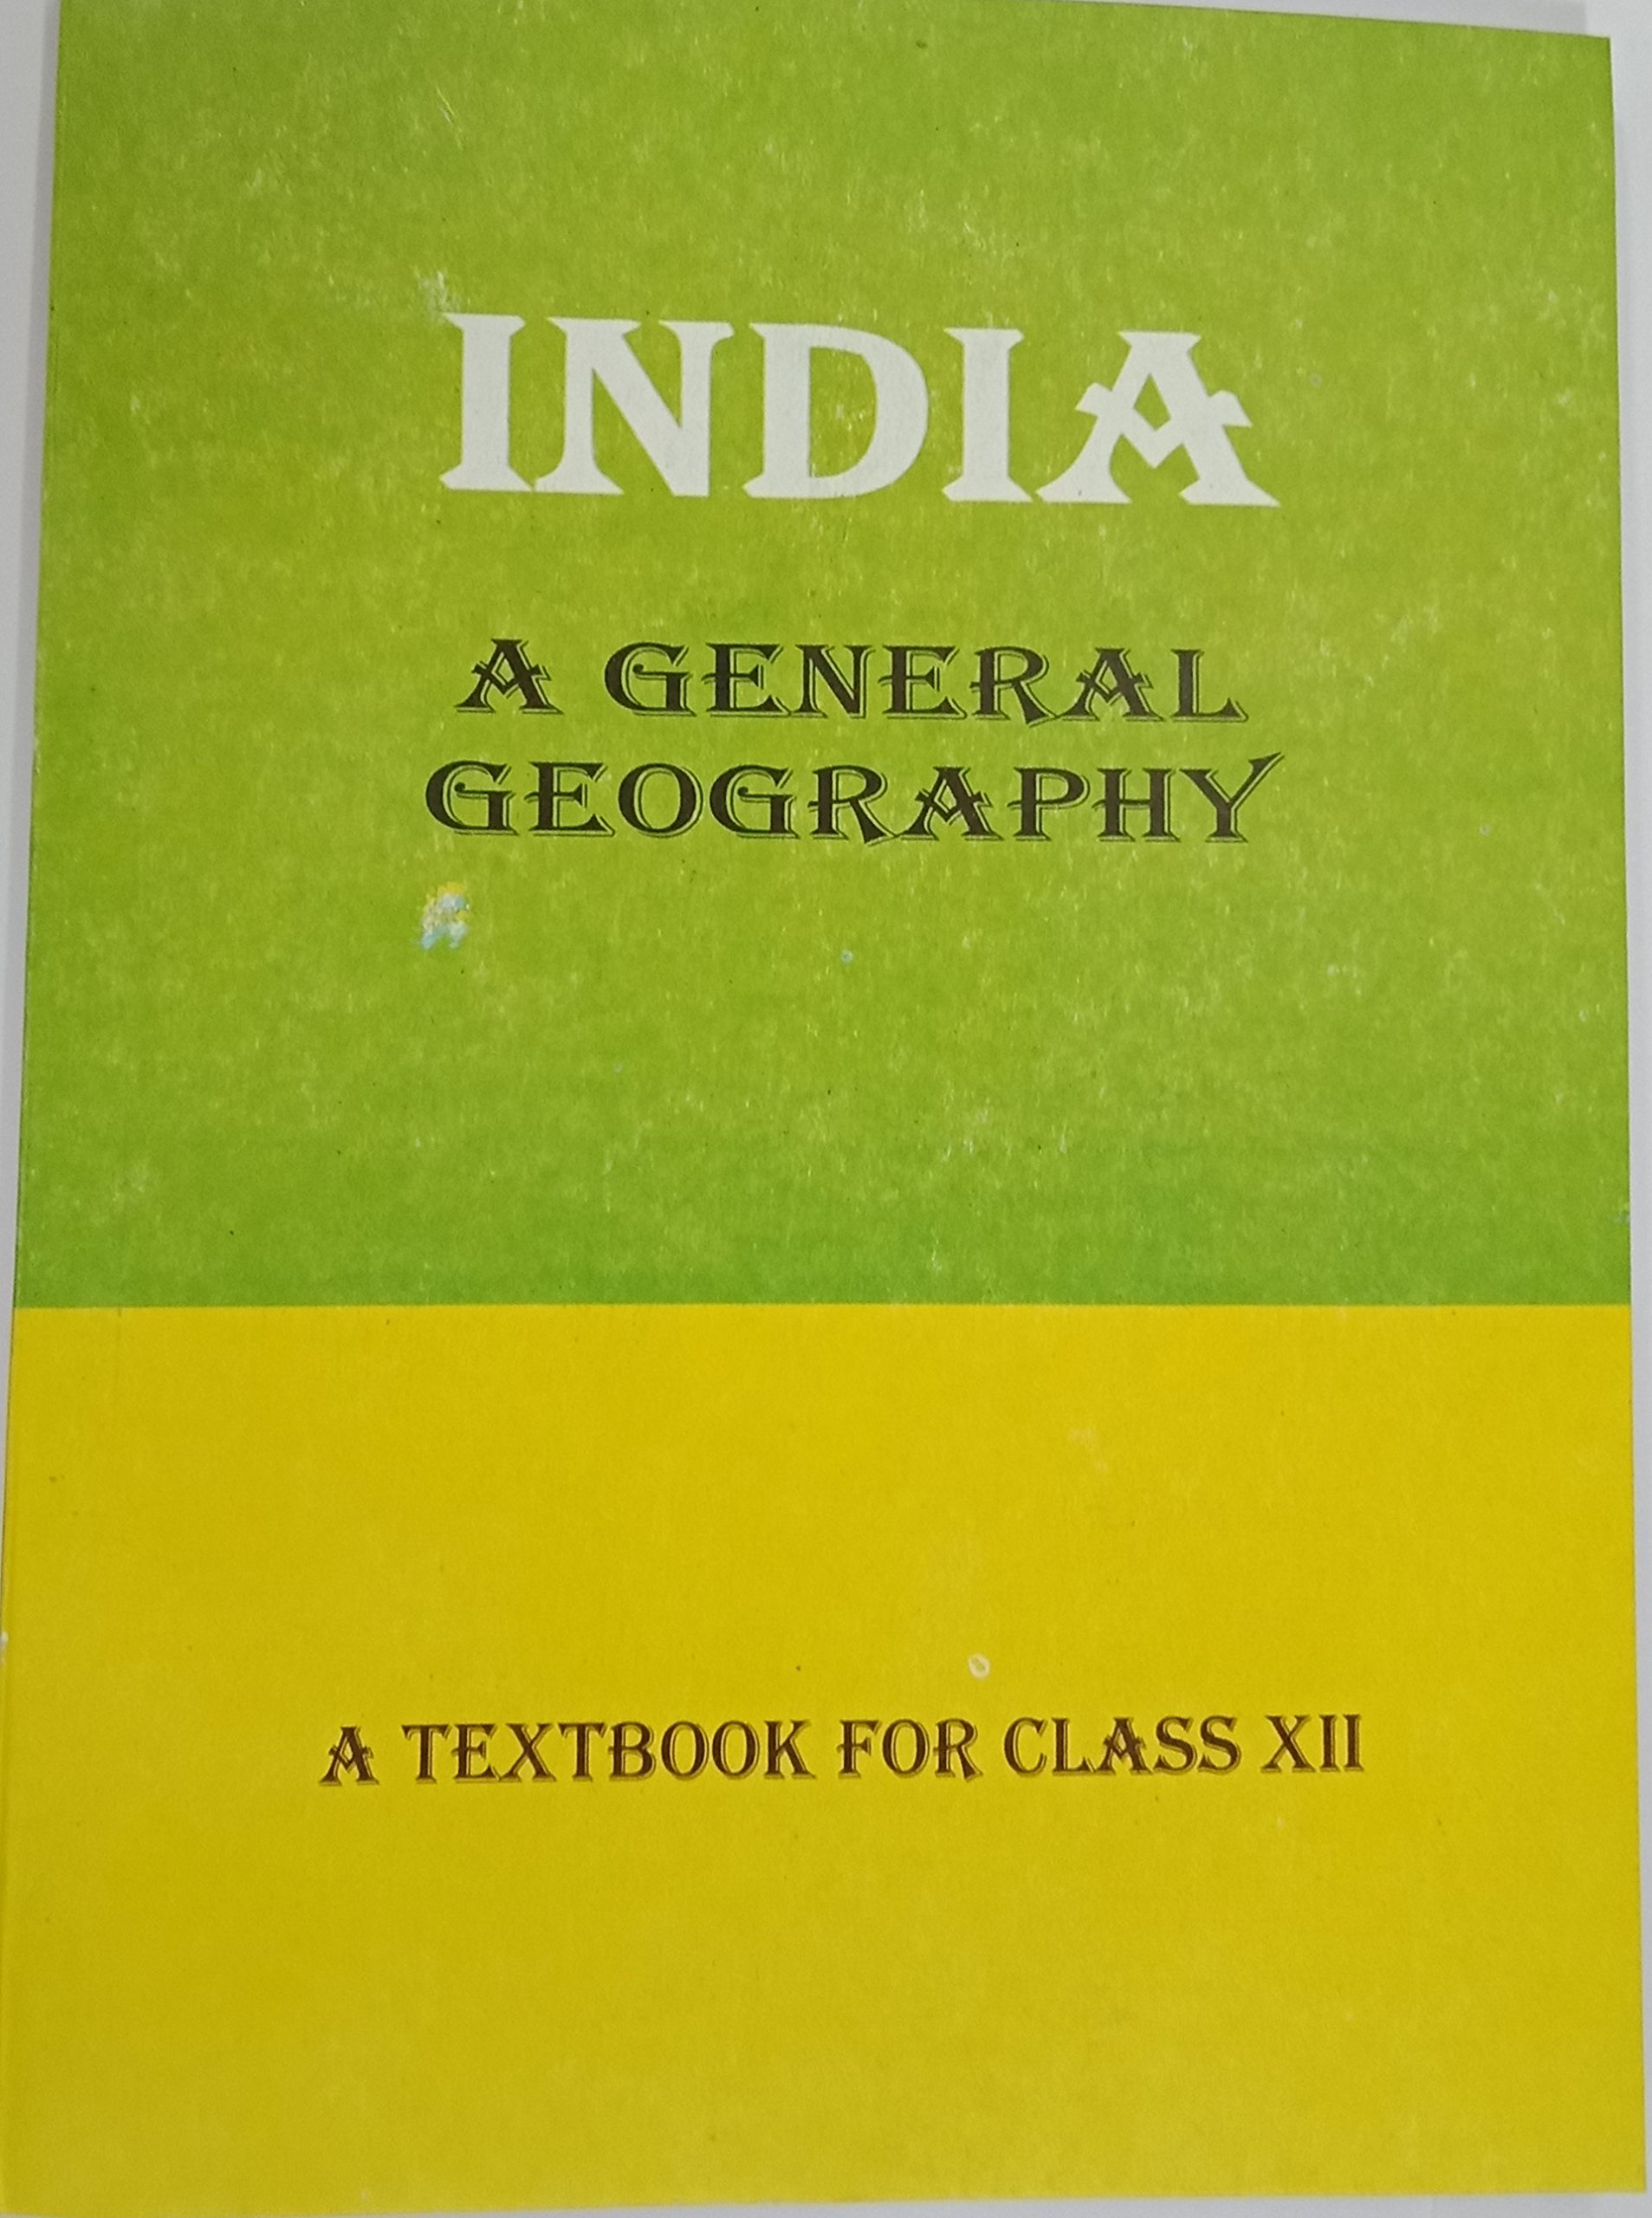 INDIA A GENERAL GEOGRAPHY